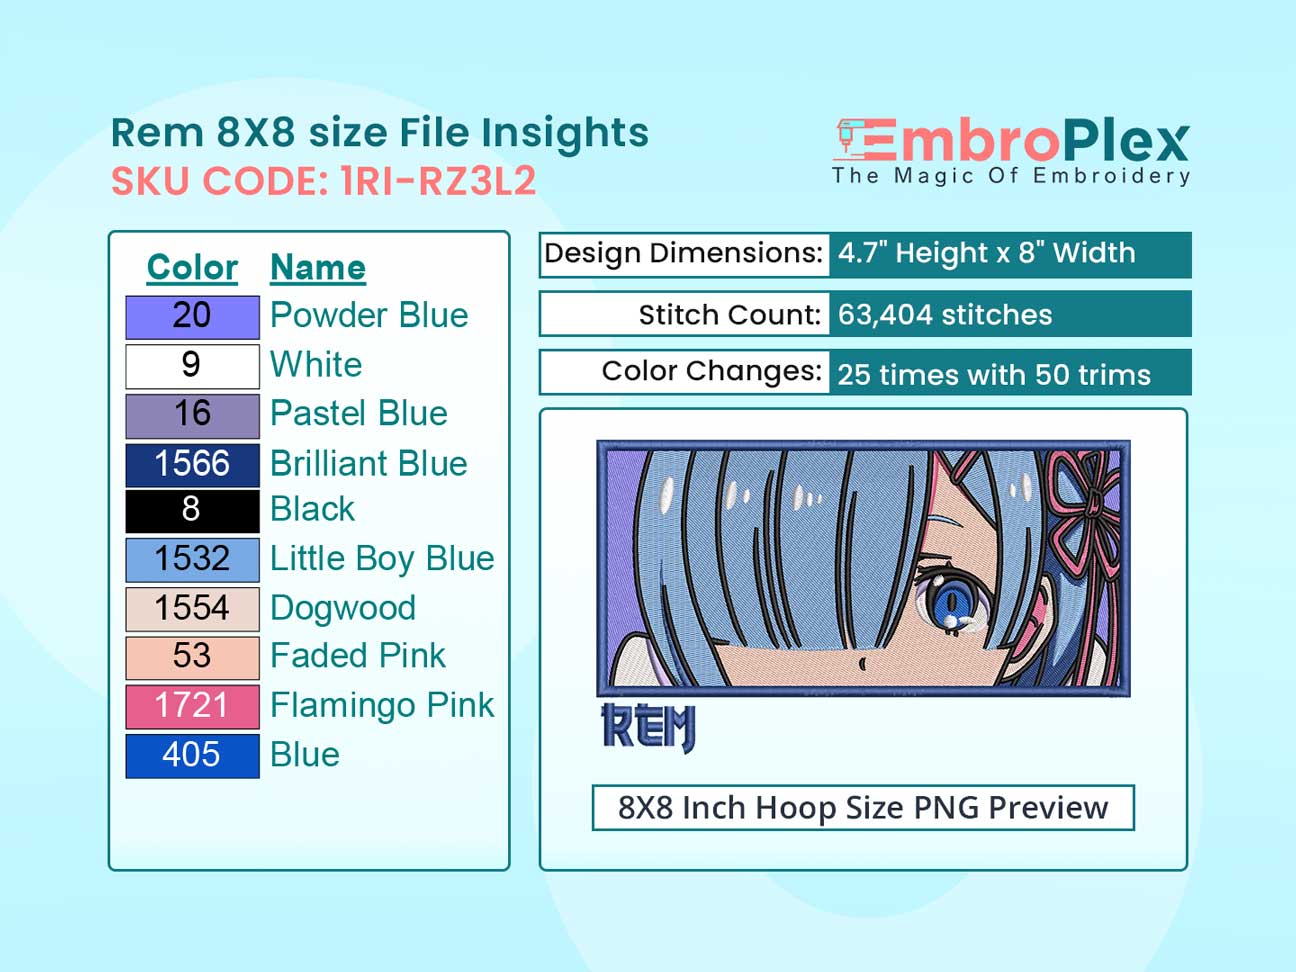 Anime-Inspired Rem Embroidery Design File - 8x8 Inch hoop Size Variation overview image